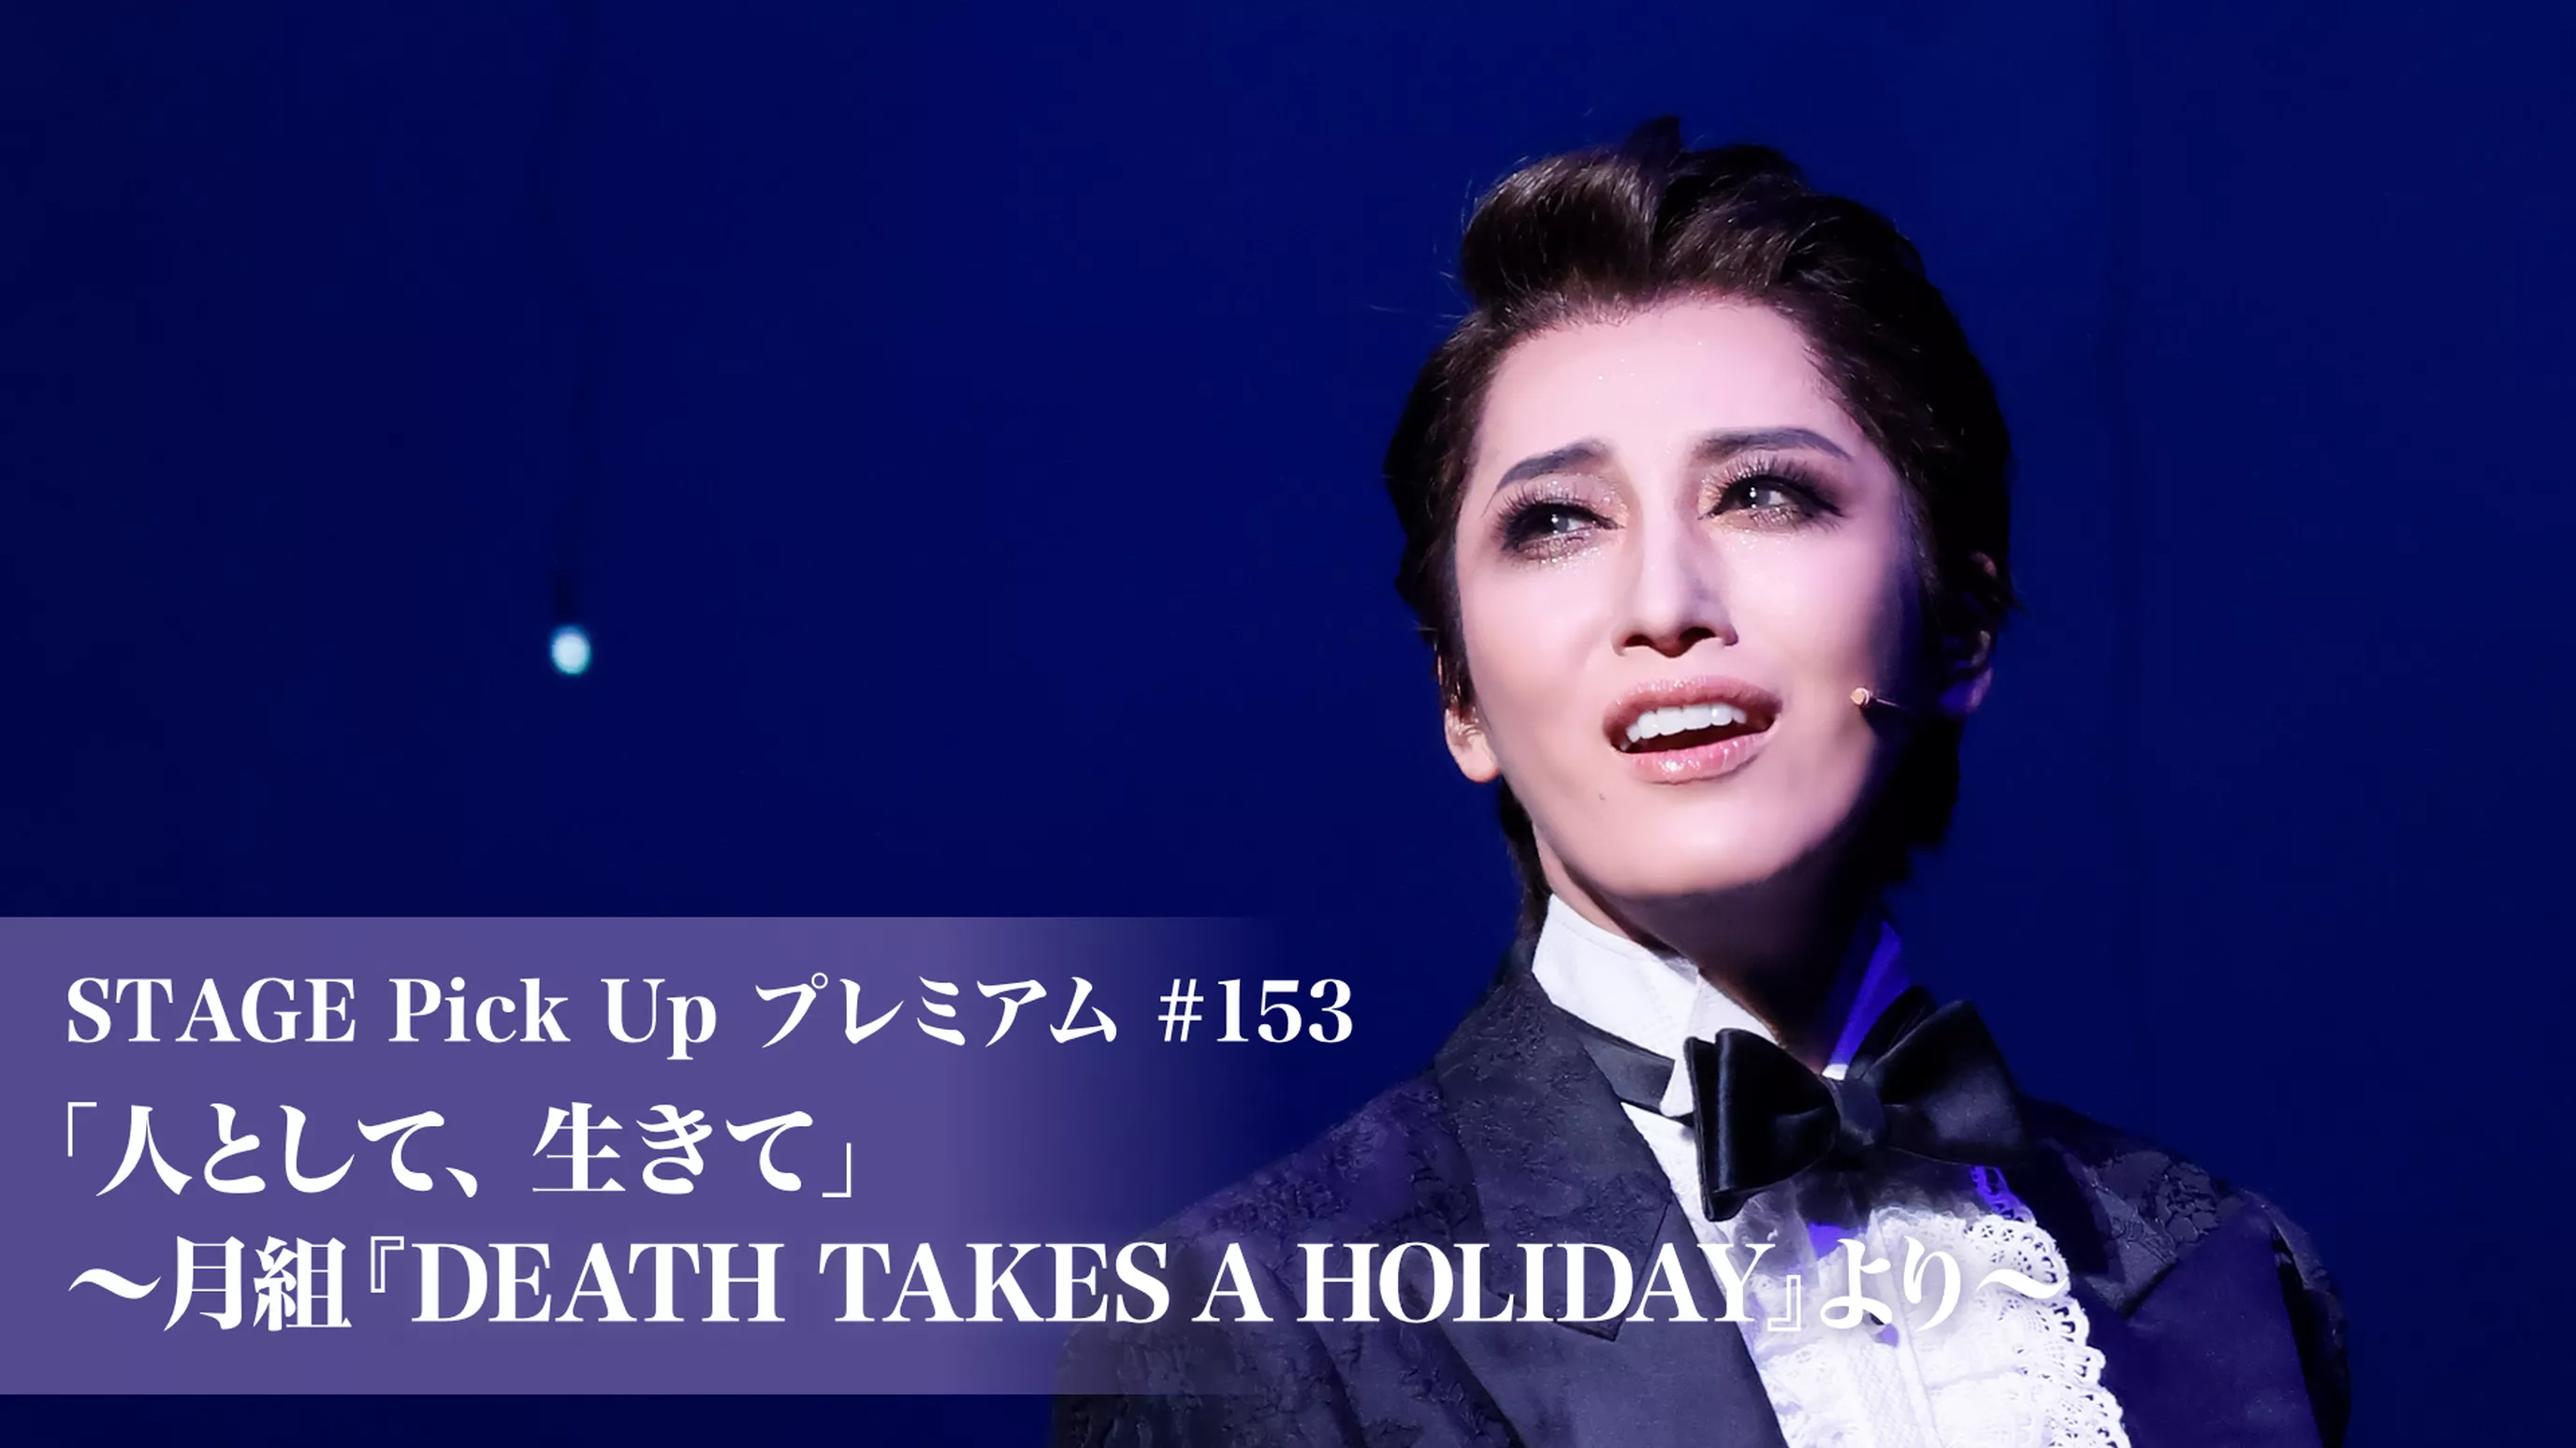 STAGE Pick Up プレミアム#153「人として、生きて」～月組『DEATH TAKES A HOLIDAY』より～